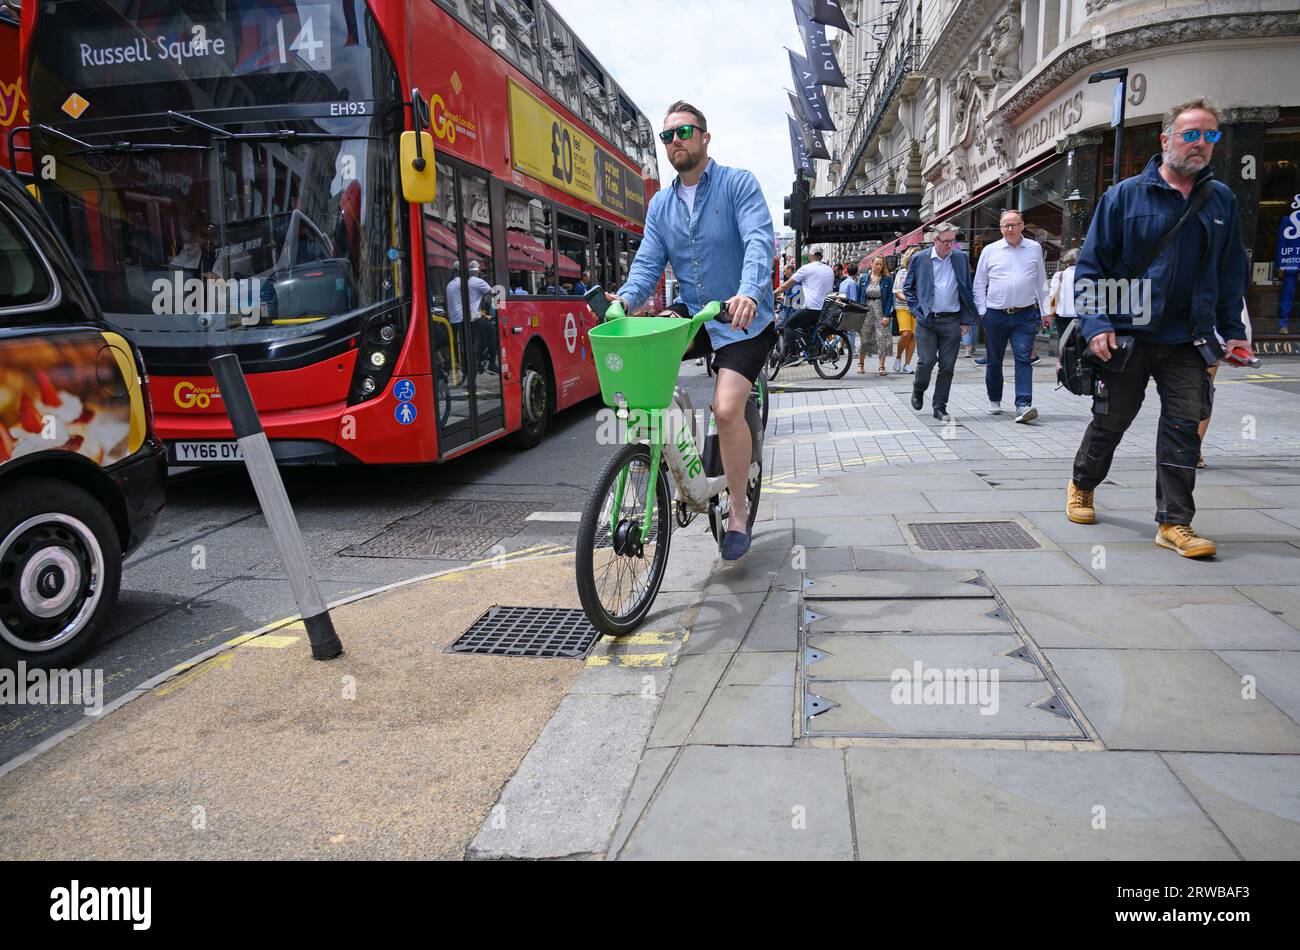 London, England, UK. Man cycling on the pavement in Piccadilly on a Lime rental bike Stock Photo